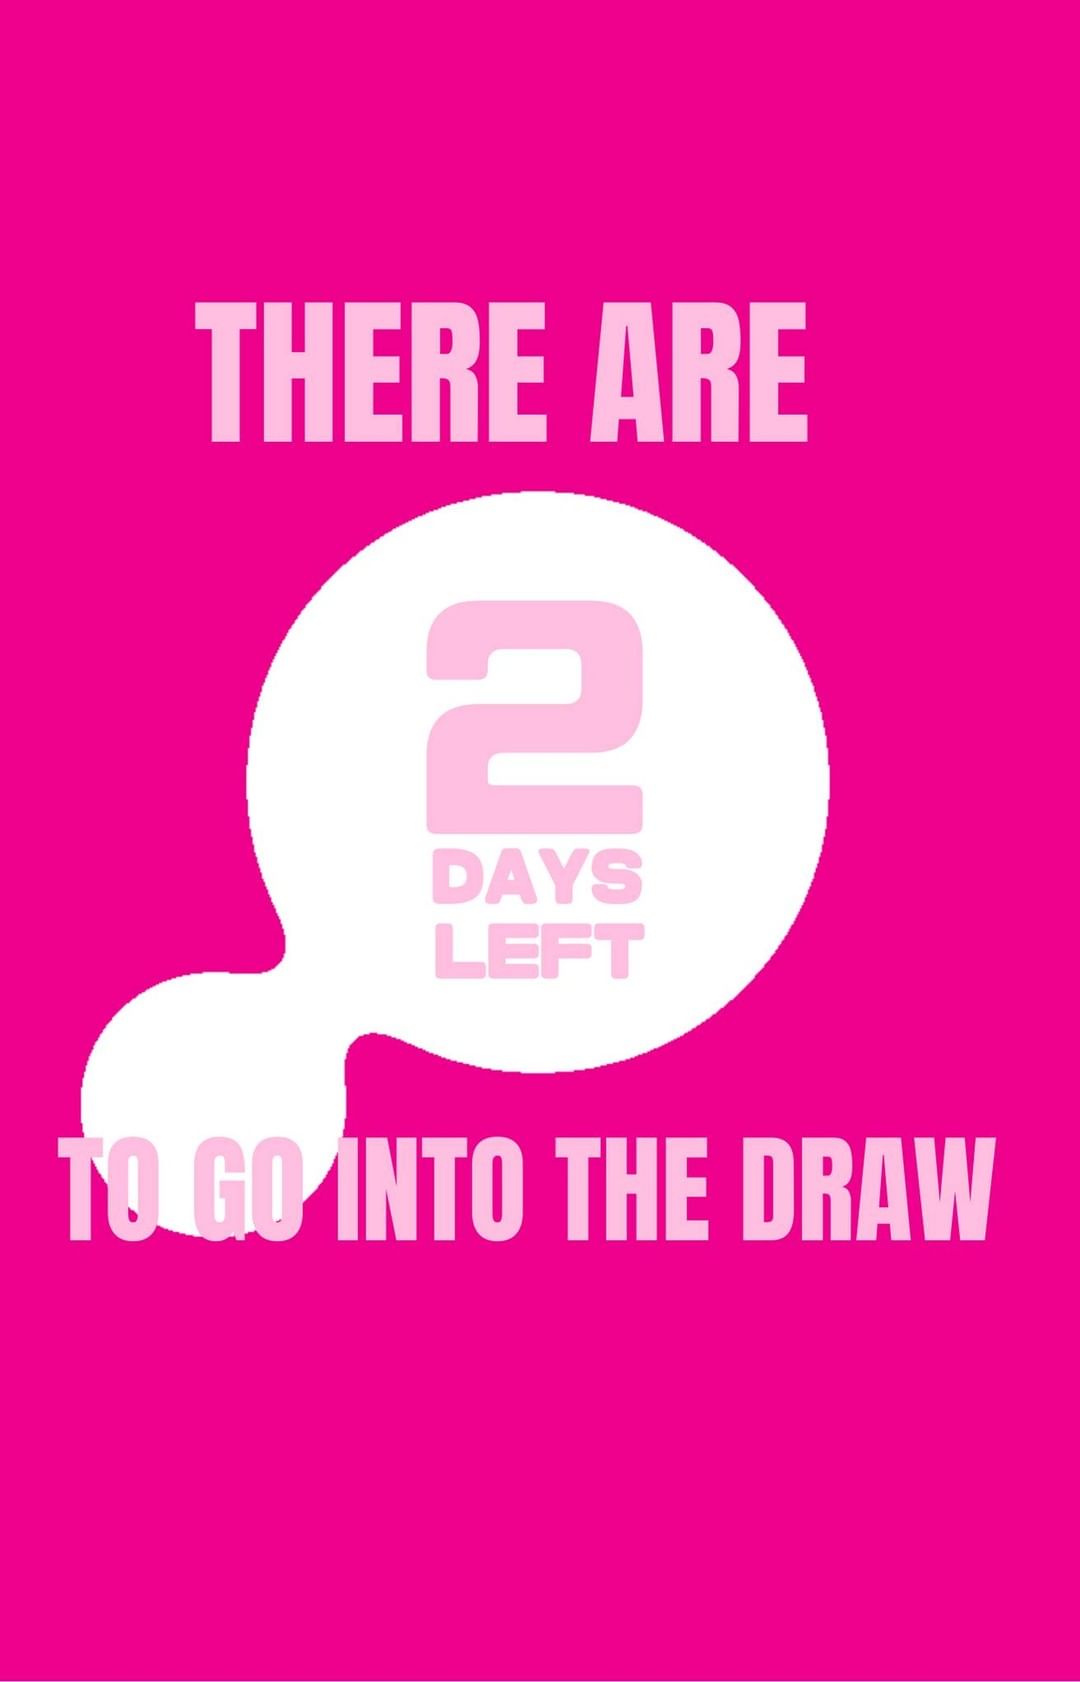 2 DAYS LEFT TO GO INTO THE DRAW TO WIN THE ULTIMATE CASH PRIZE 💳🎁Follow these steps to go into the draw to win!1. Be a...